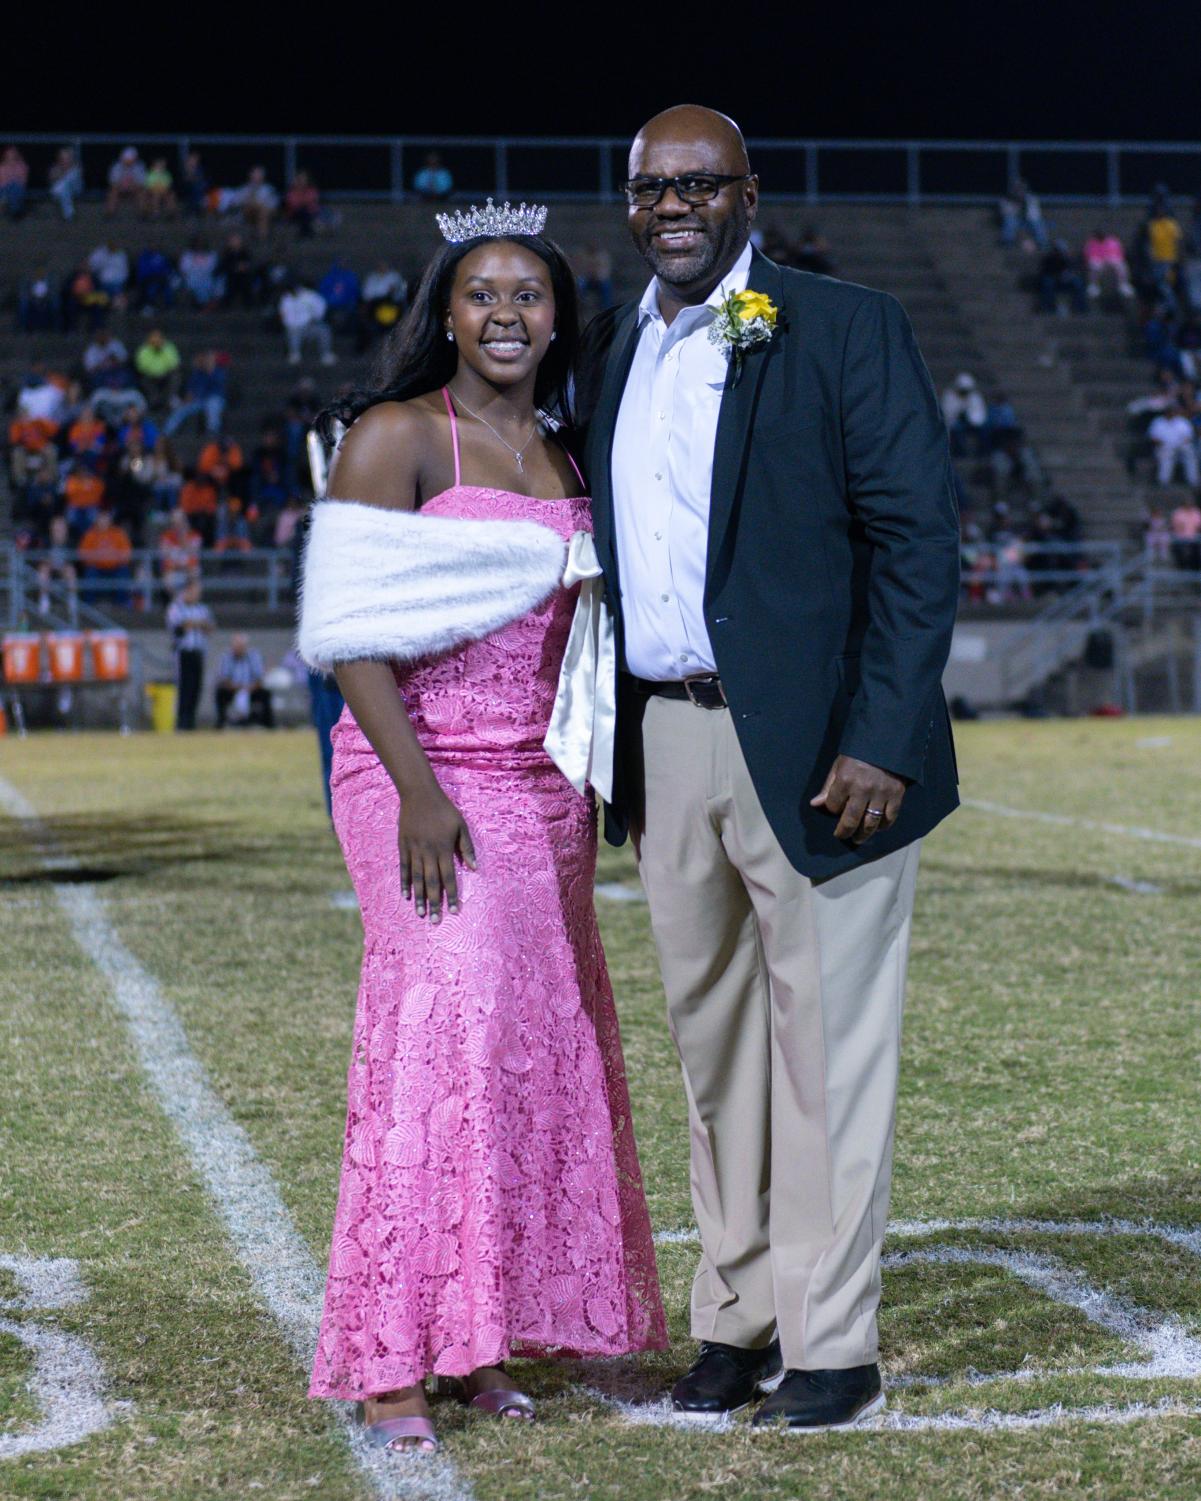 Mr. Freeman congratulates Addison Truzy on her win as Queen of Compassion and Homecoming Queen for 2022-2023.